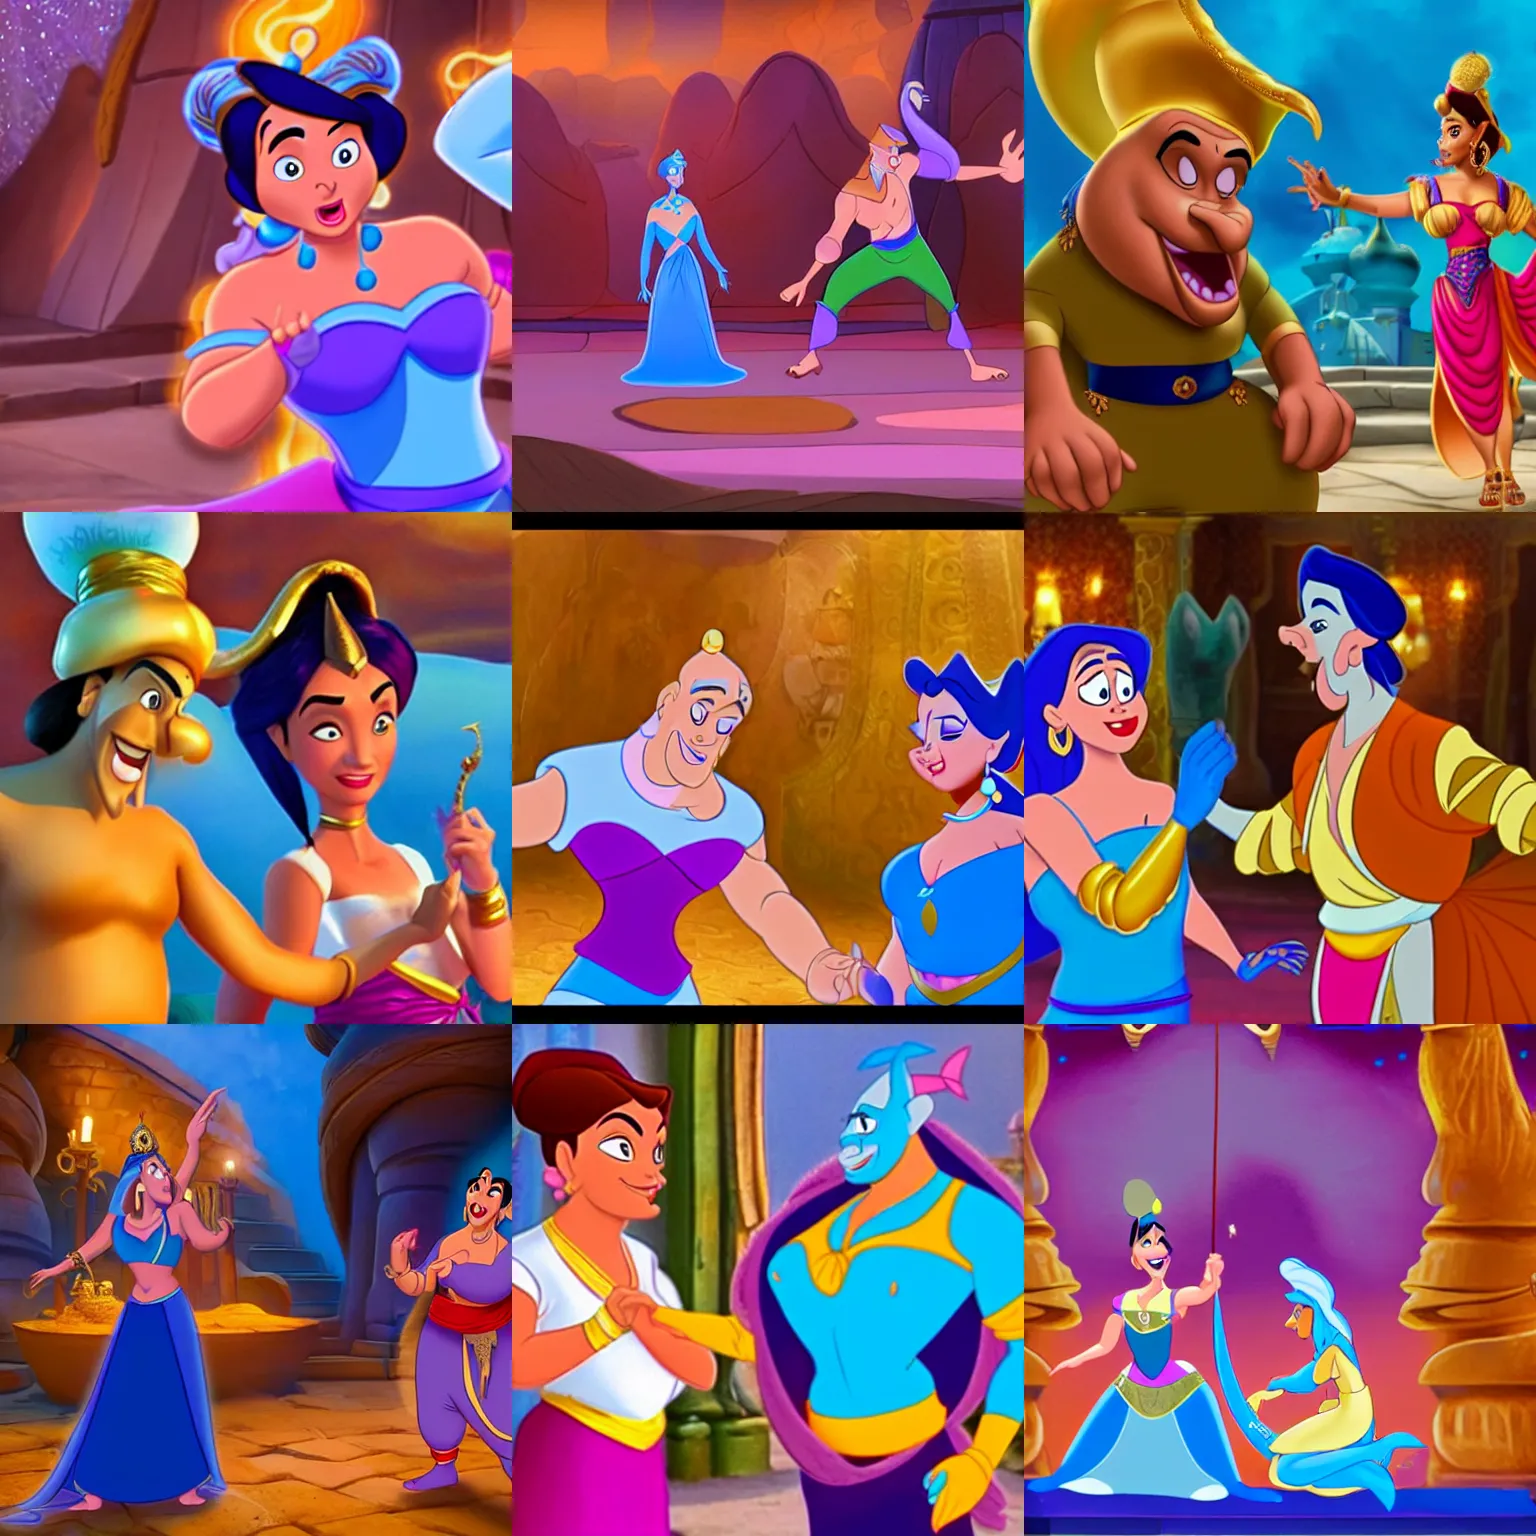 Prompt: magical genie next to a surprised shocked woman who is dressed as a genie, woman transformed into a genie, trick, screenshot aladdin movie disney cartoon